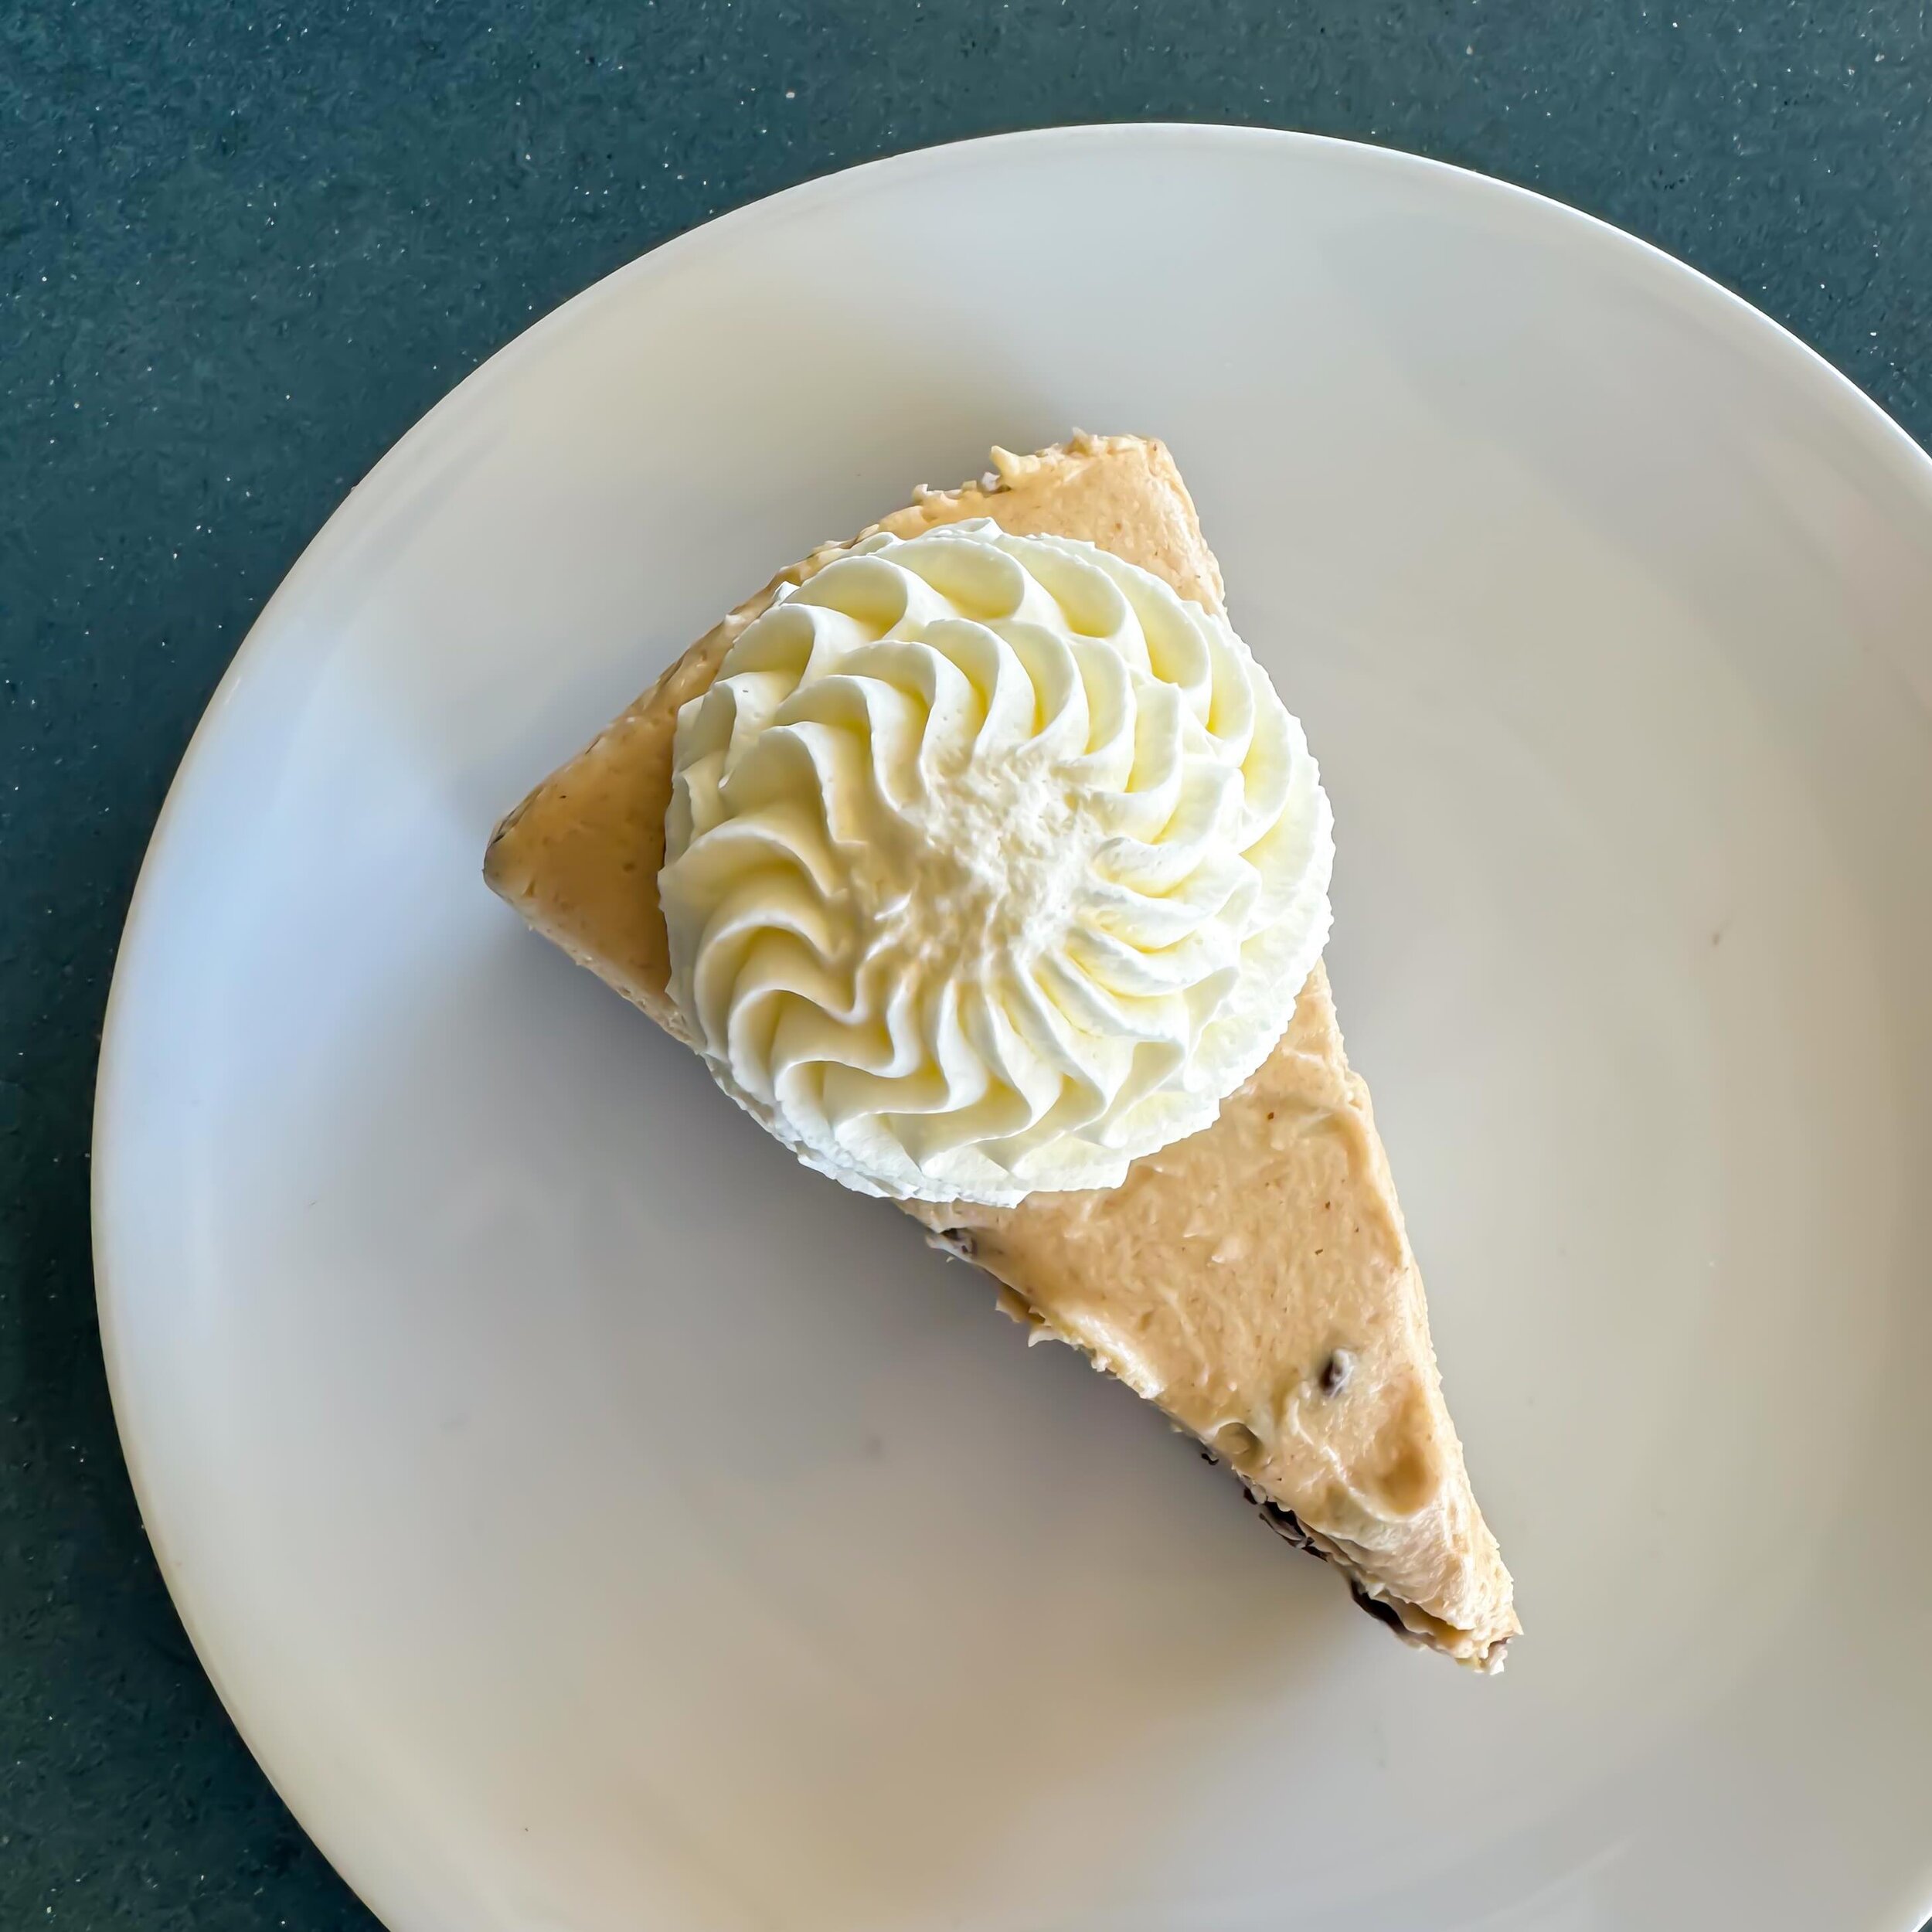 New month, new desserts!

PEANUT BUTTER MOUSSE PIE
Creamy peanut butter mousse with a homemade Oreo crust and topped with whipped cream. 

Pair with Duke of Swirl. 

Available now and all month long. Full food and beer menus available on our website.